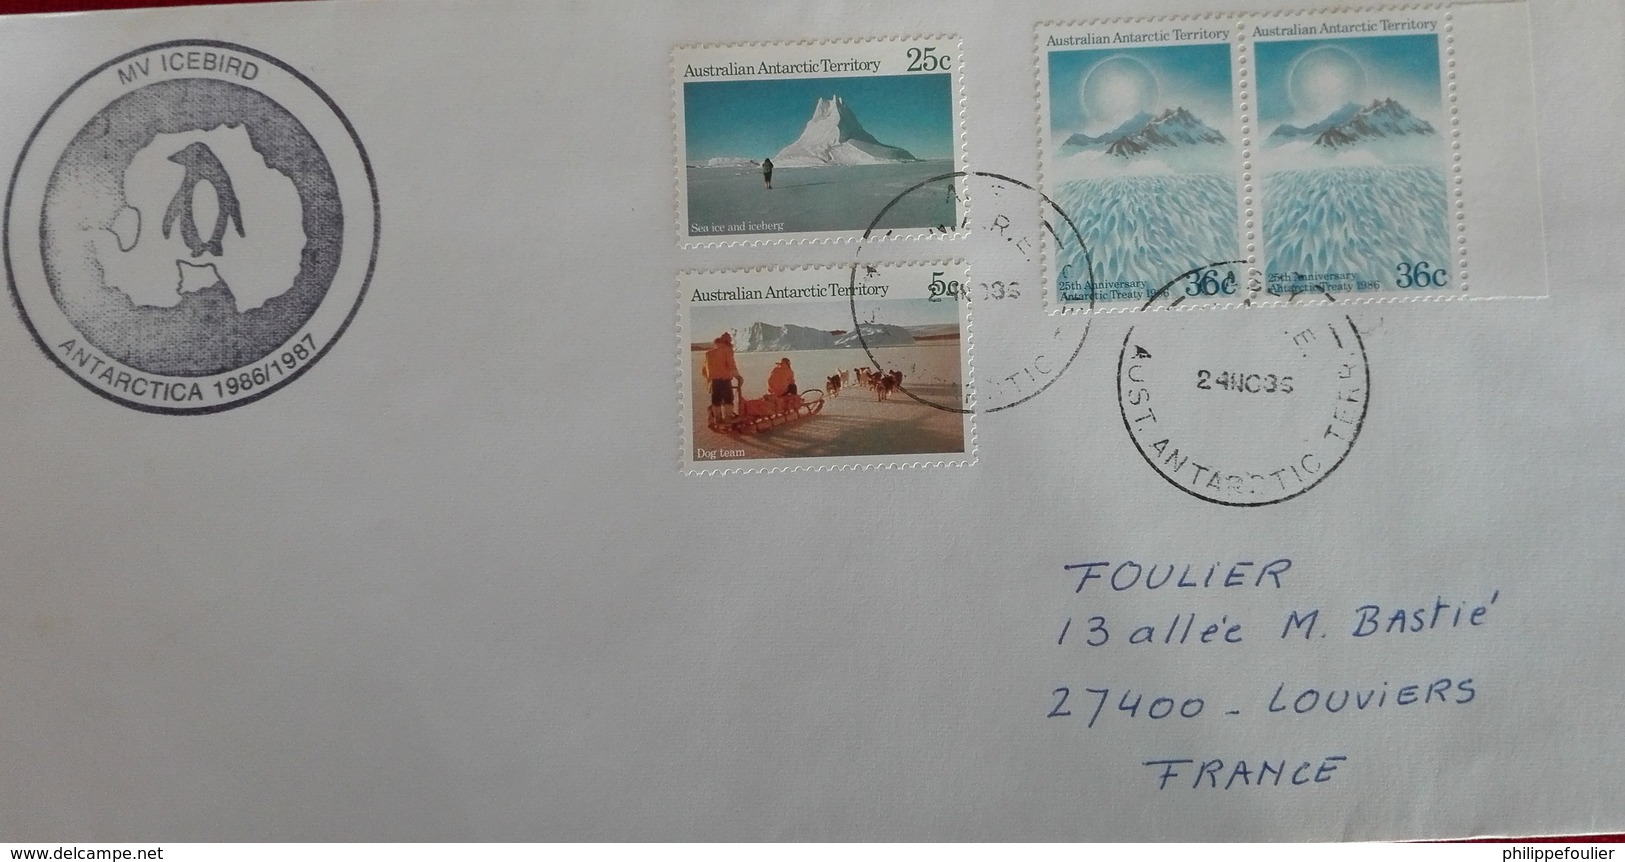 AAT Casey 24/11/86 Cover Landscape Stamps - MV Icebird - Lettres & Documents